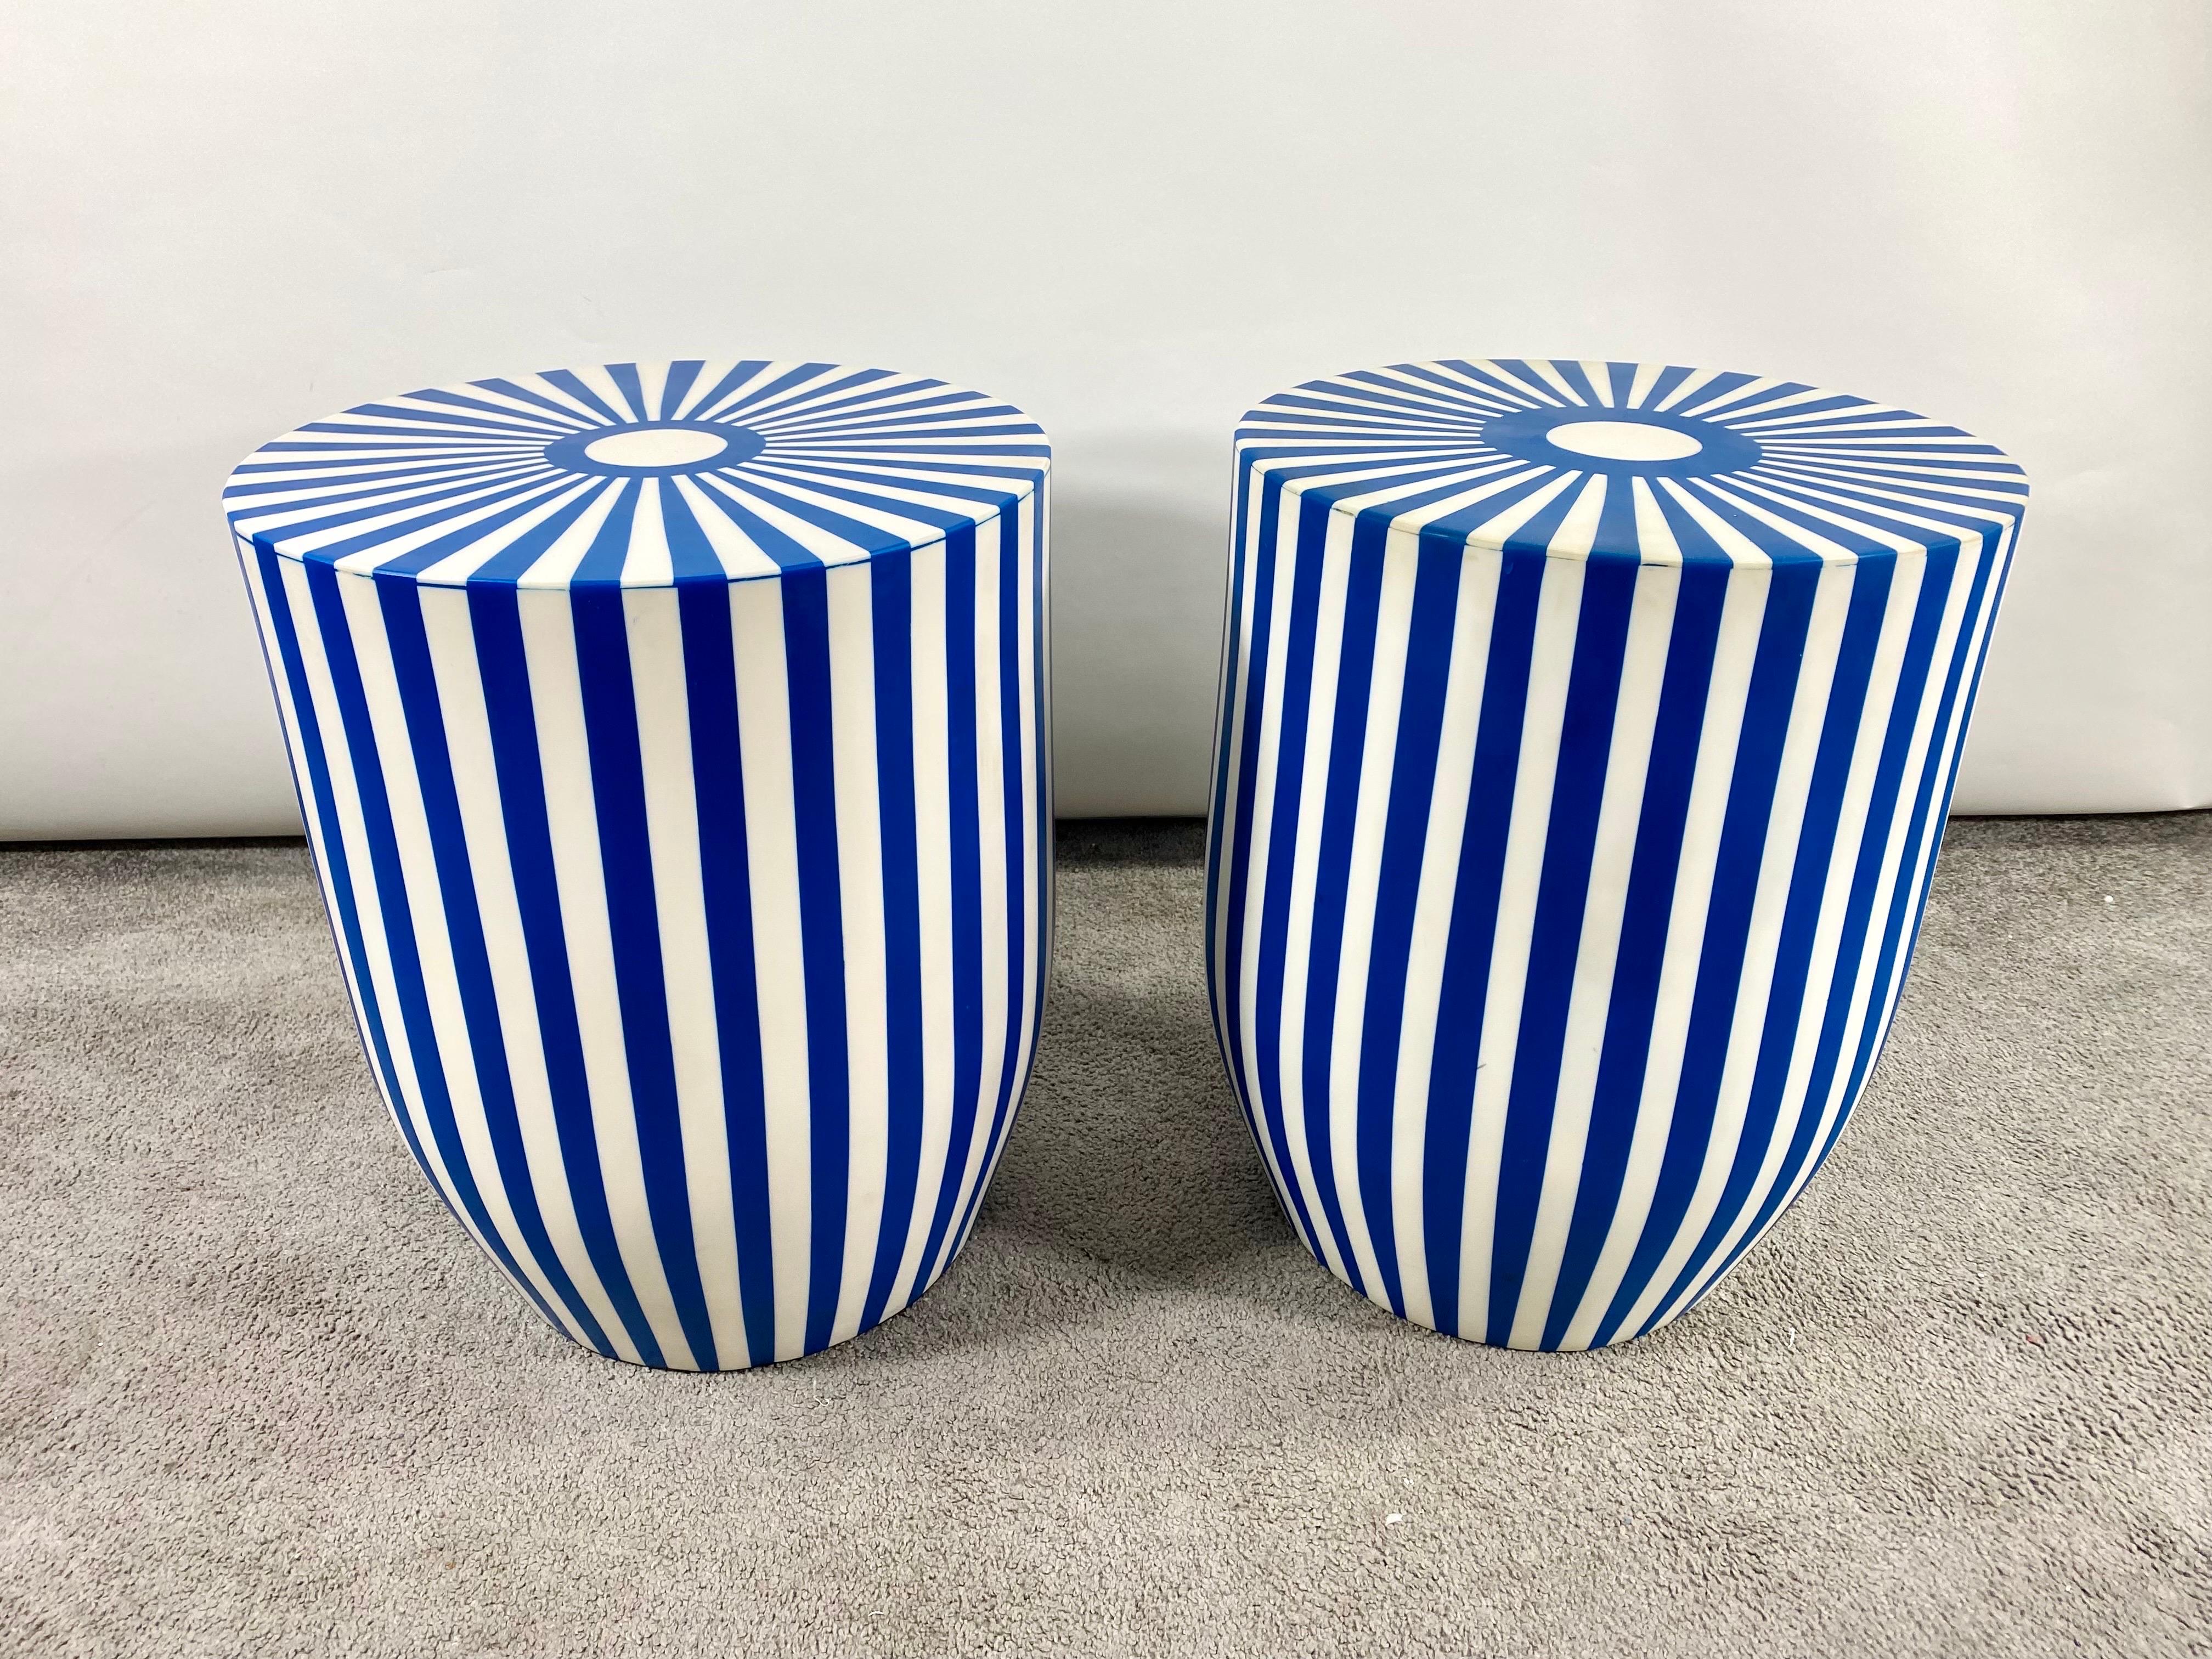 An exquisite pair of Art Deco style blue and white side tables or stools featuring a striped design. The tables are made of quality resin and have a solid and sturdy structure. The sculptural cylindrical shaped tables or stools have a round top and